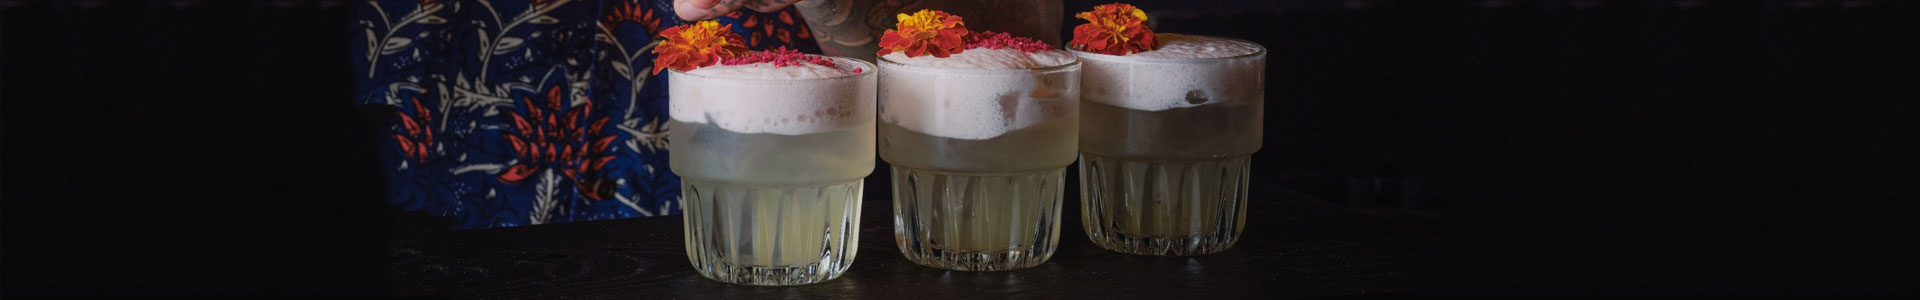 Three identical small tumblers from the Everst series by Libbey, filled with a light-colored drink with a frothy top and each garnished with an orange-red blossom.